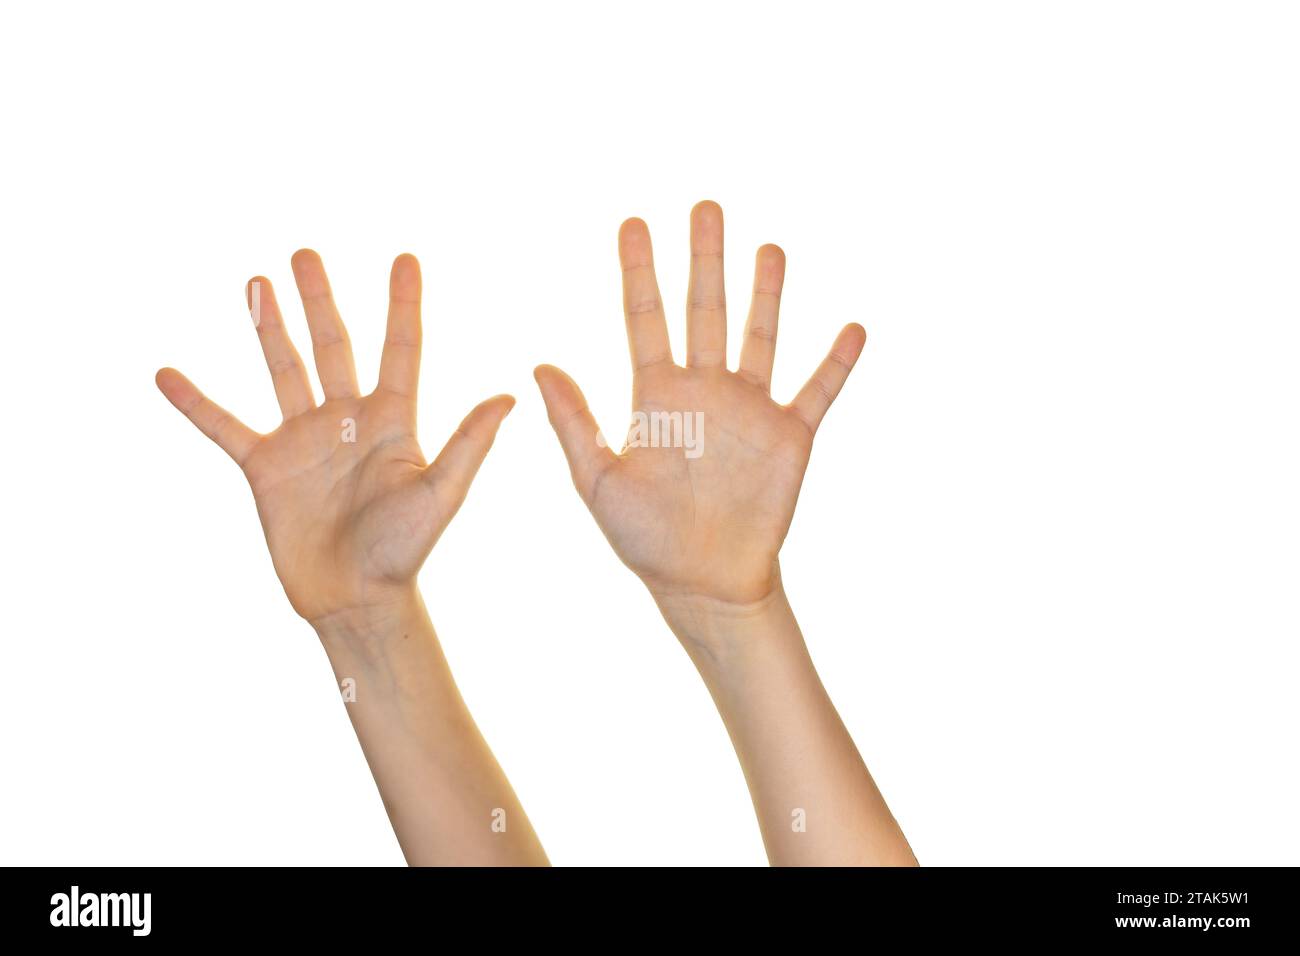 Two open hands with ten fingers, showing numbers, hands up, white background Stock Photo